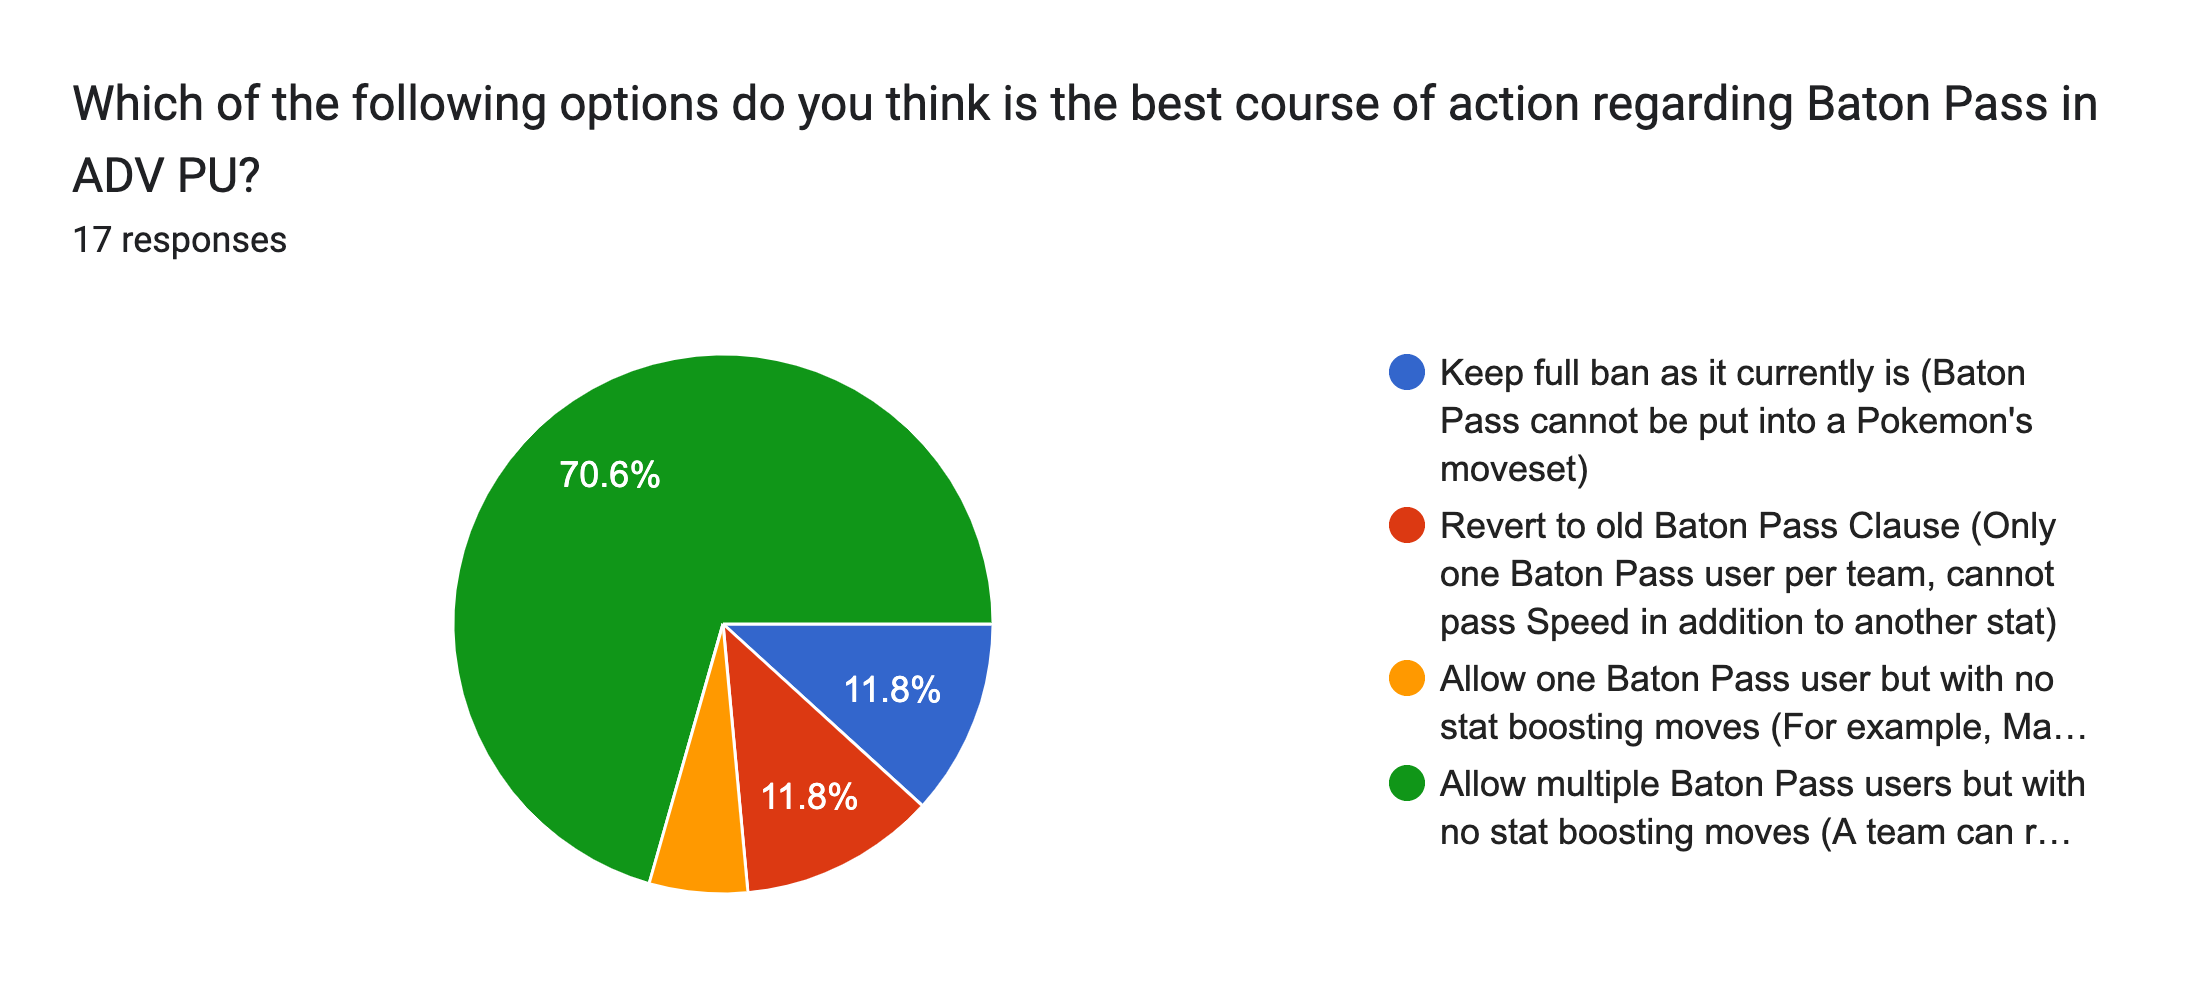 Forms response chart. Question title: Which of the following options do you think is the best course of action regarding Baton Pass in ADV PU?. Number of responses: 17 responses.